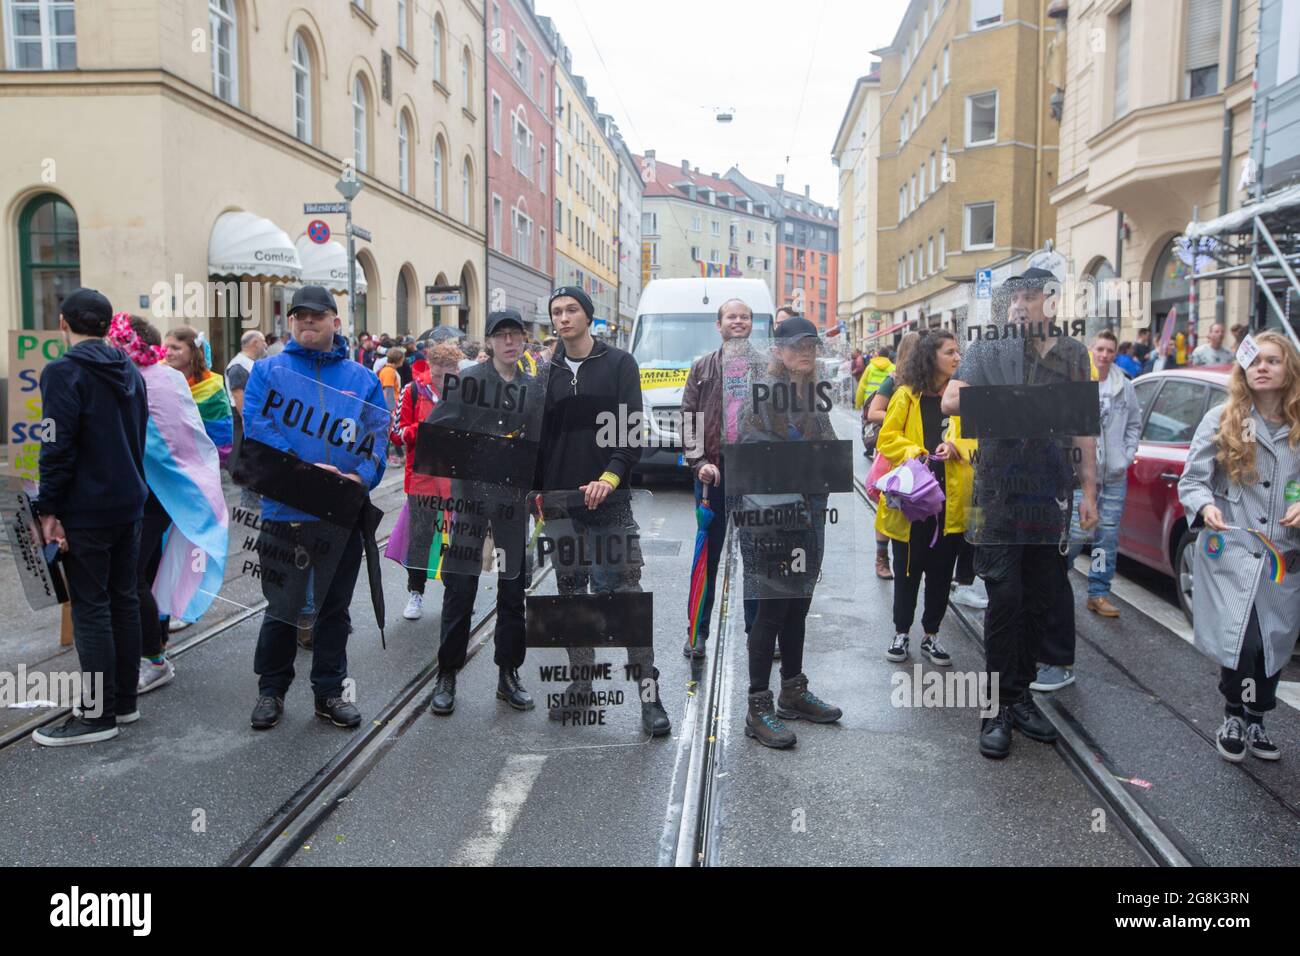 Munich, Germany. 13th July, 2019. Protest against Police brutality against Prides and LGBTQ people. On 13.7.2019 Hundreds of Thousands celebrated the Pride ( Christopher Street Day ) in Munich. Several LGBTQ Groups participated. (Photo by Alexander Pohl/Sipa USA) Credit: Sipa USA/Alamy Live News Stock Photo